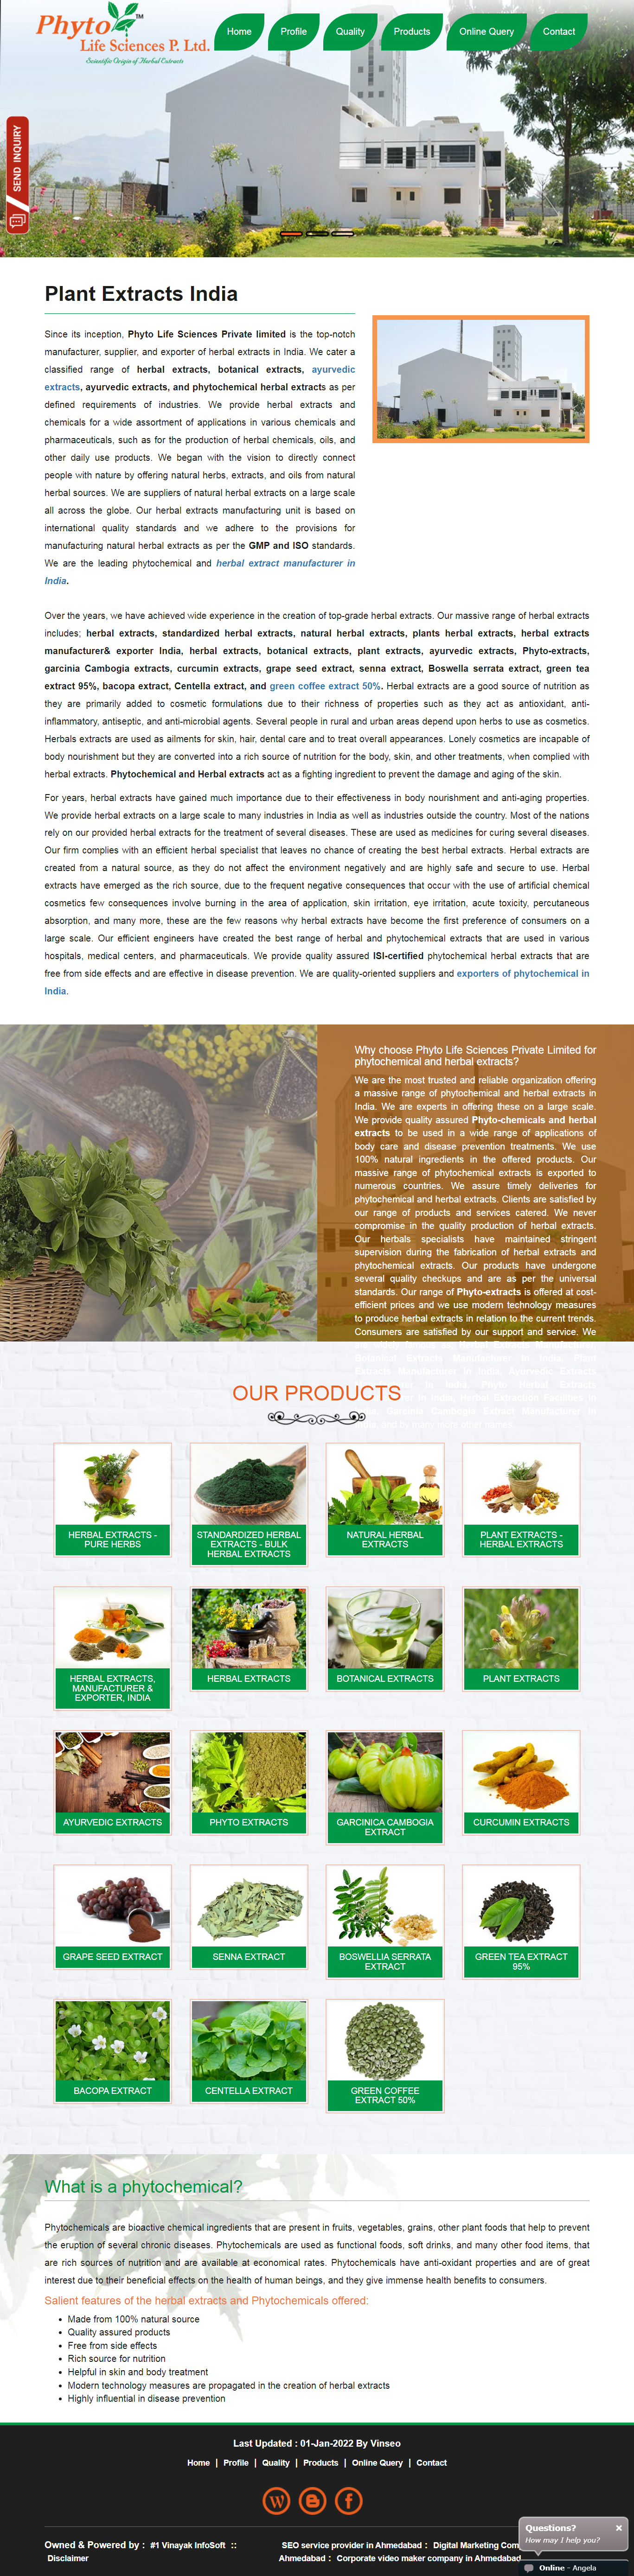 plant extracts india